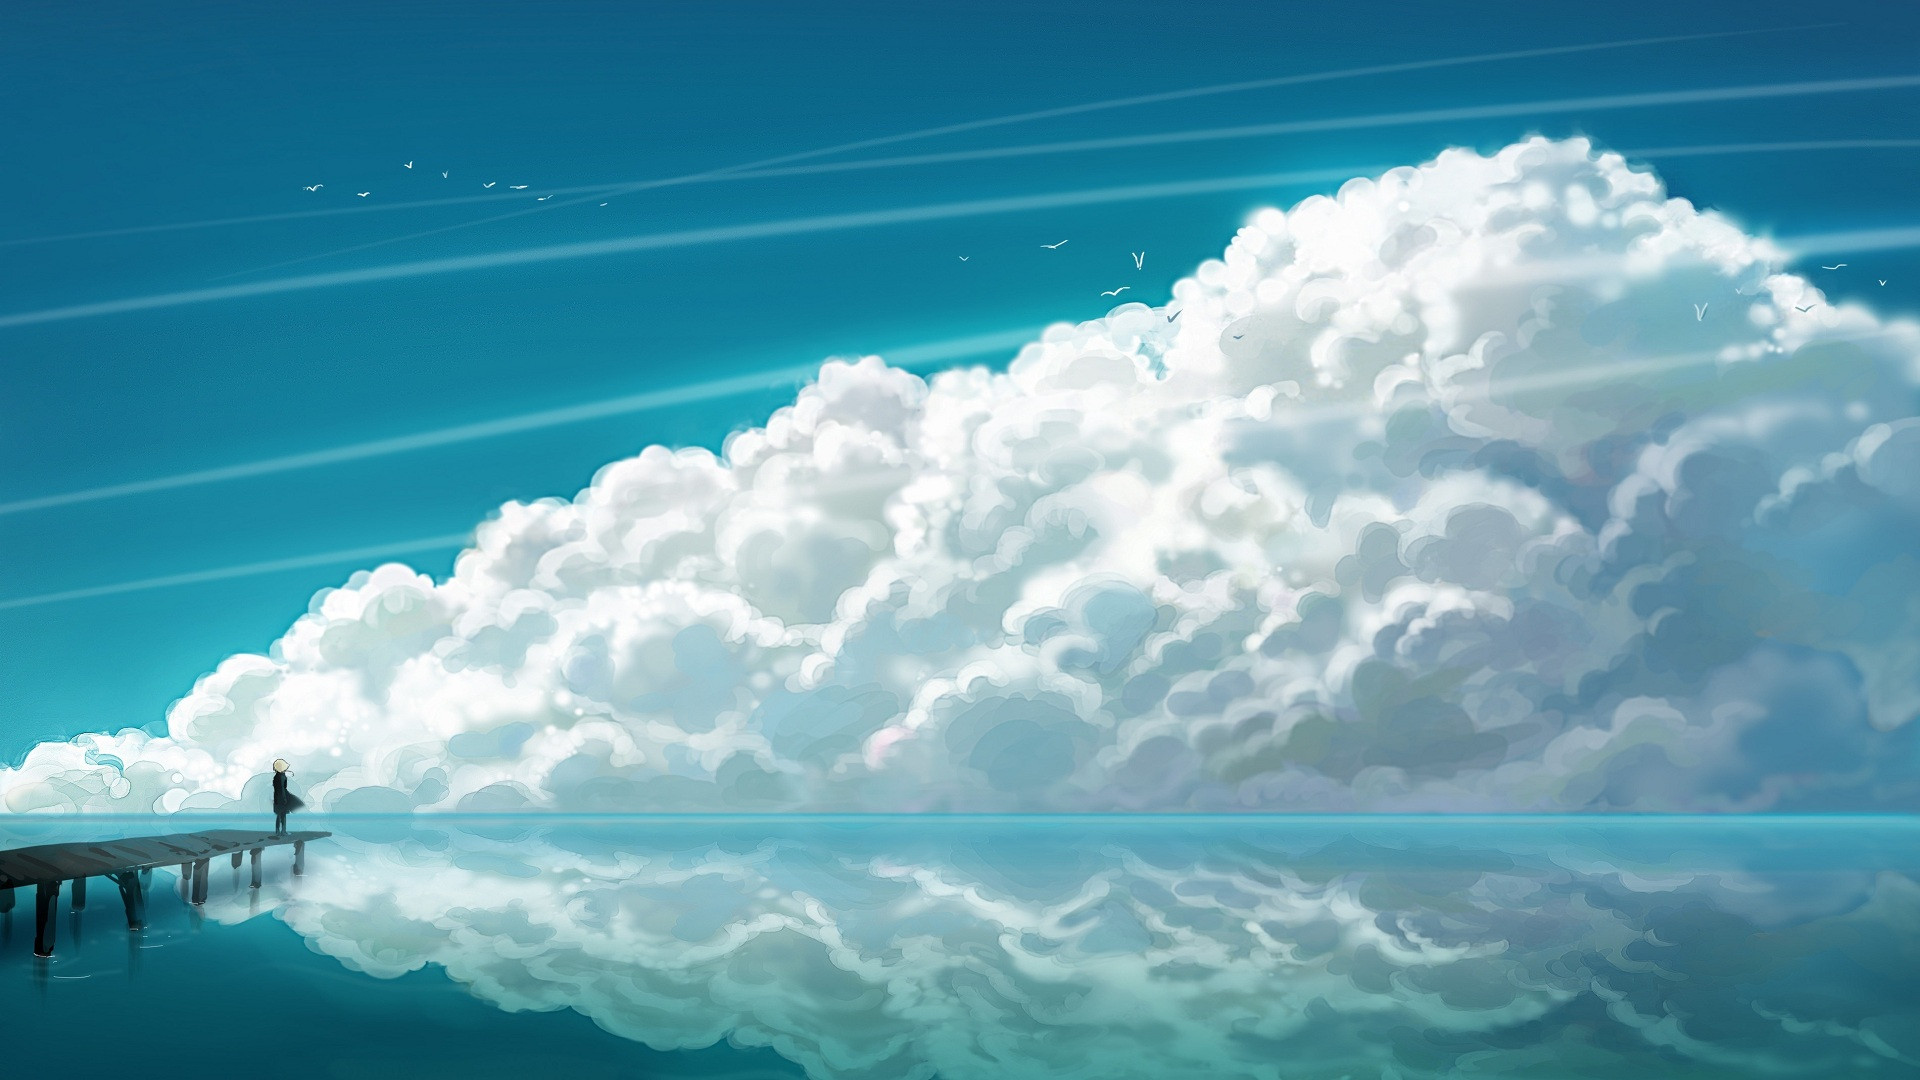 Download Storm Clouds Coming Anime Art, Storm, Clouds, Coming, Anime, Art Wallpaper in 1920x1080 Resolution